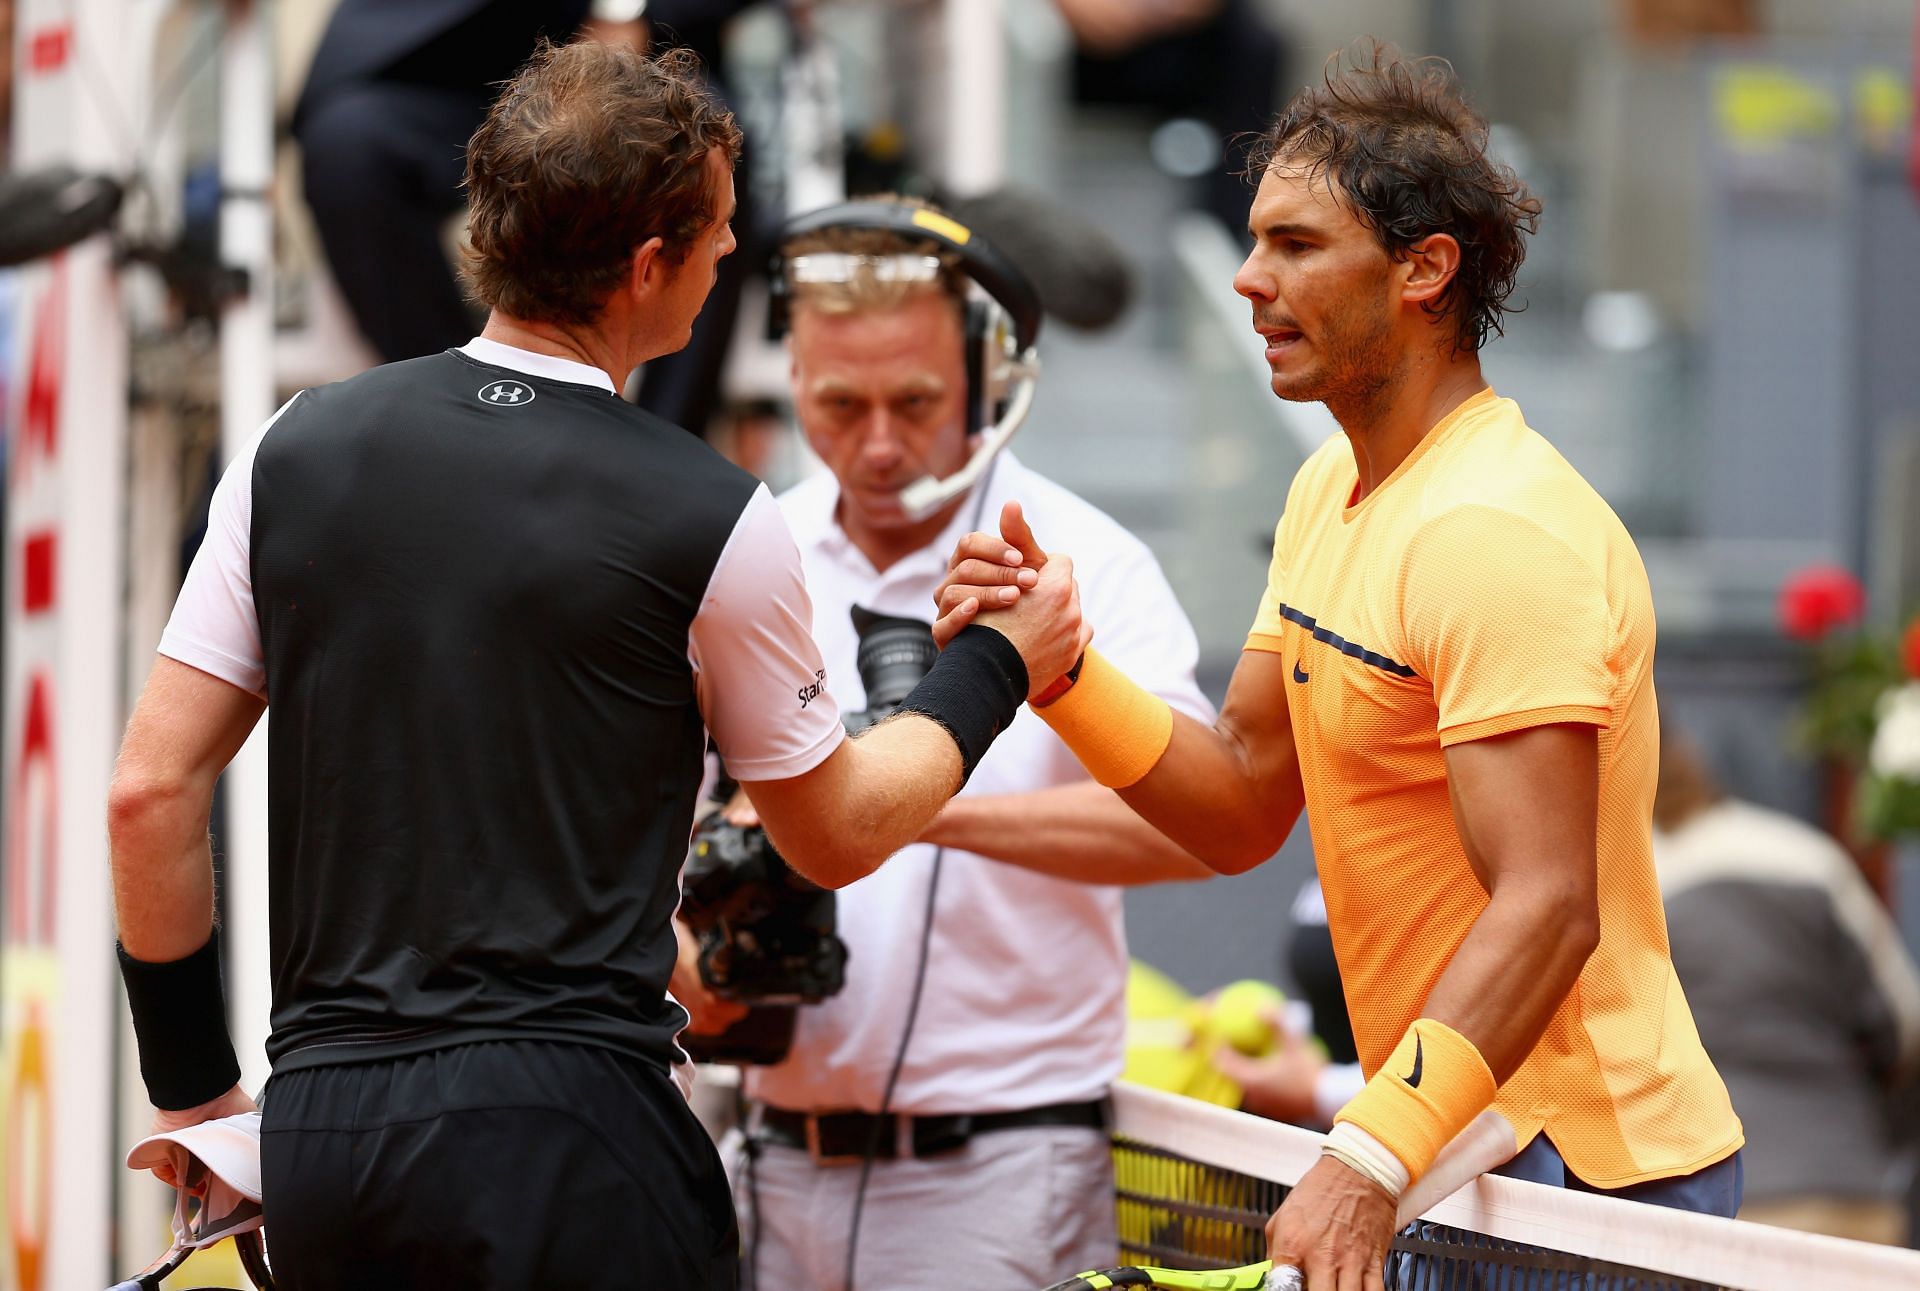 Andy Murray (L) and Rafael Nadal shaking hands after their match at the 2016 Mutua Madrid Open